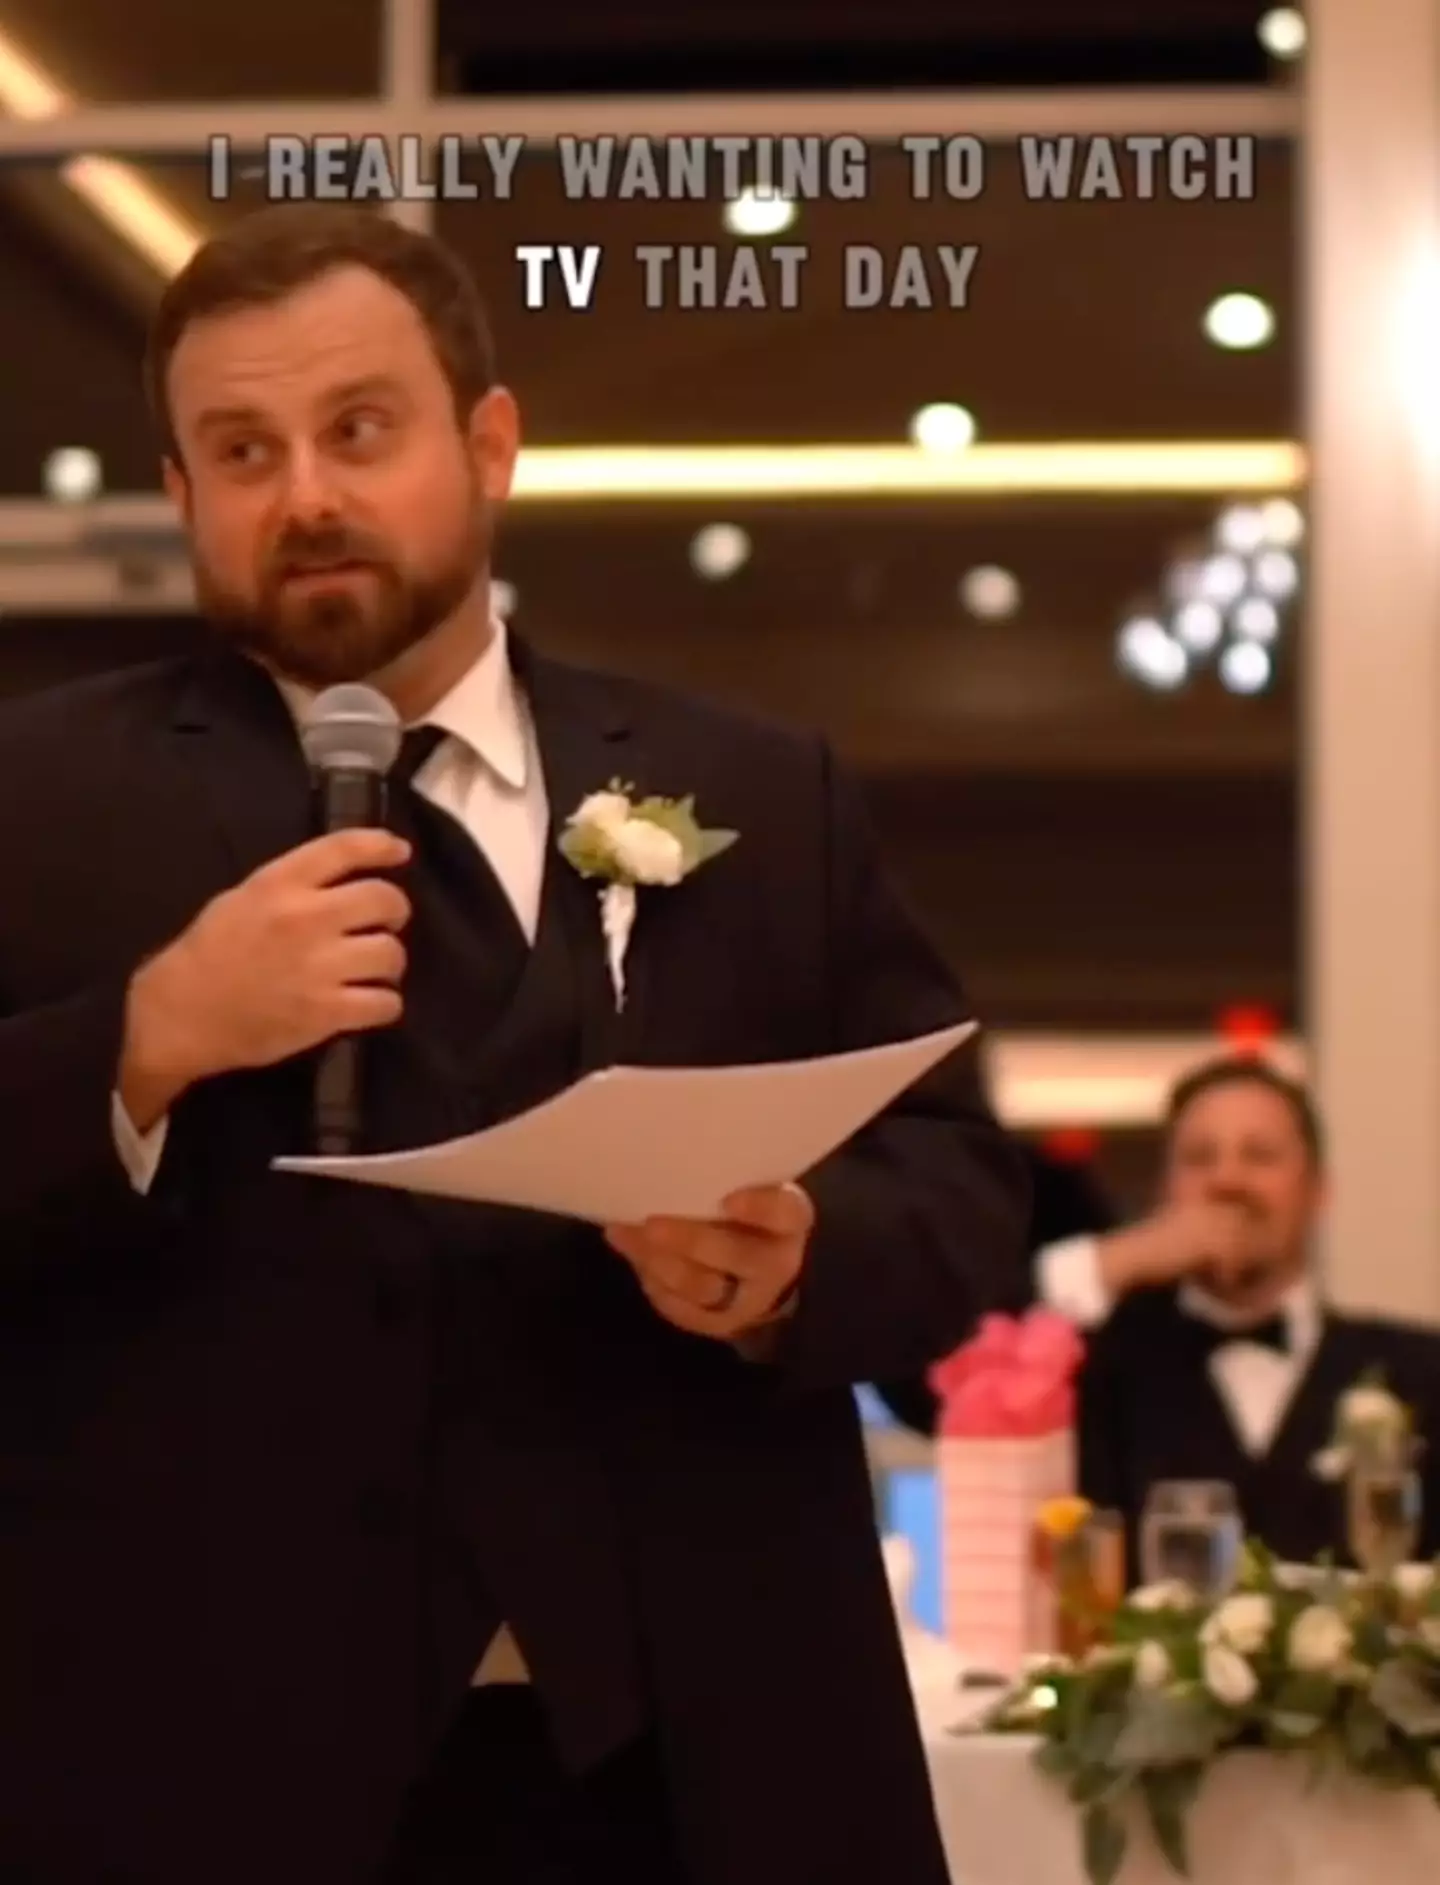 The best man left wedding guests in tears with a shock confession during his speech.